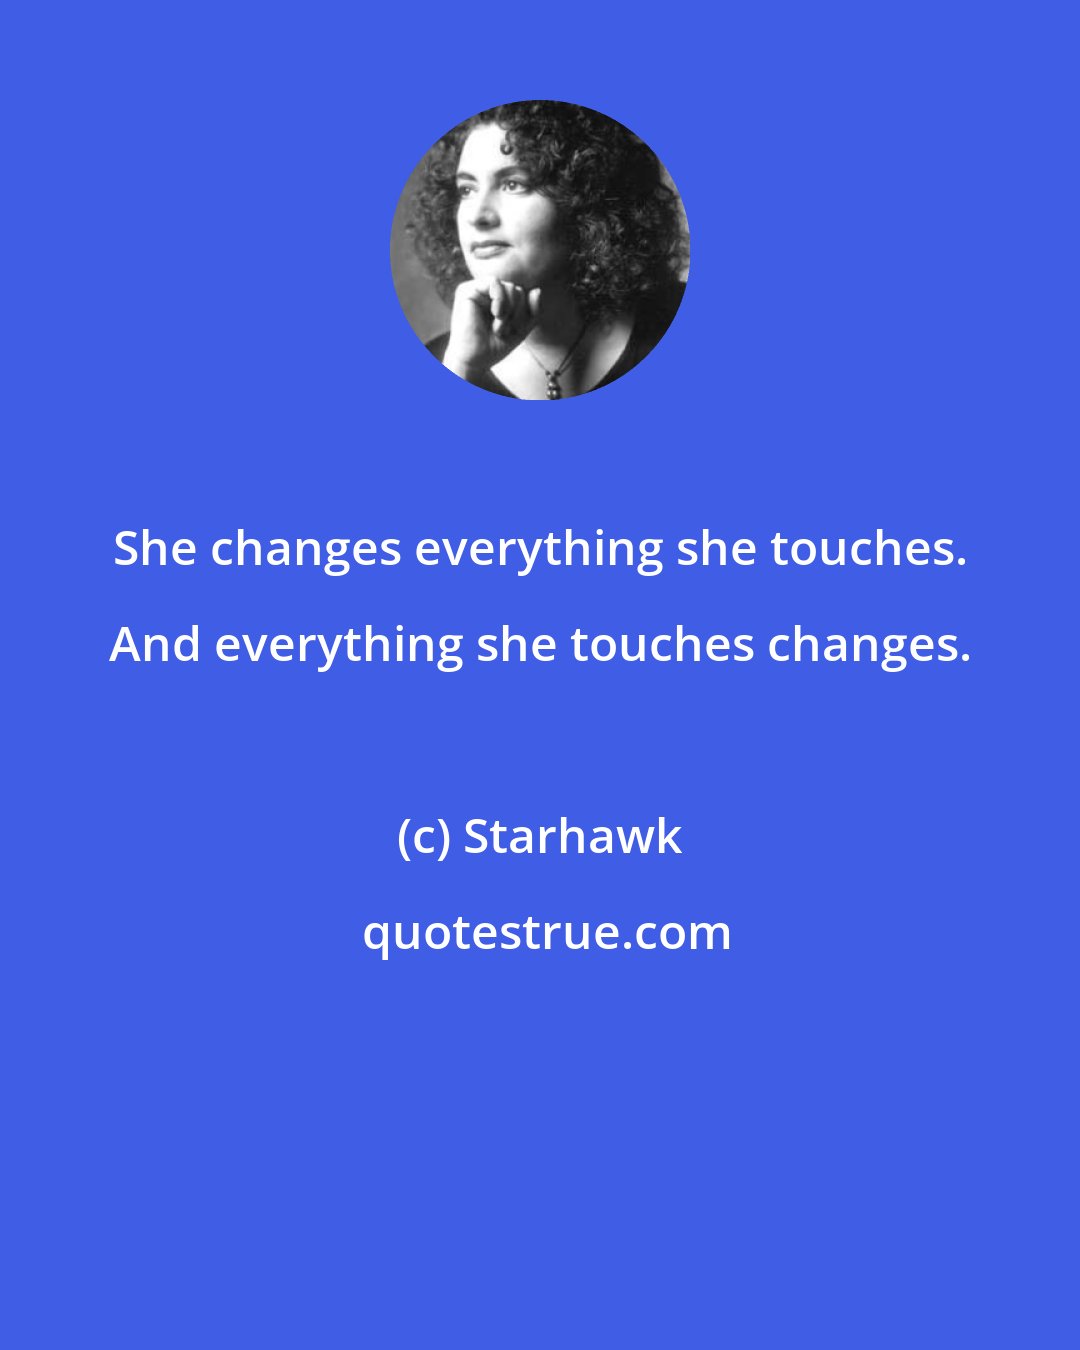 Starhawk: She changes everything she touches. And everything she touches changes.